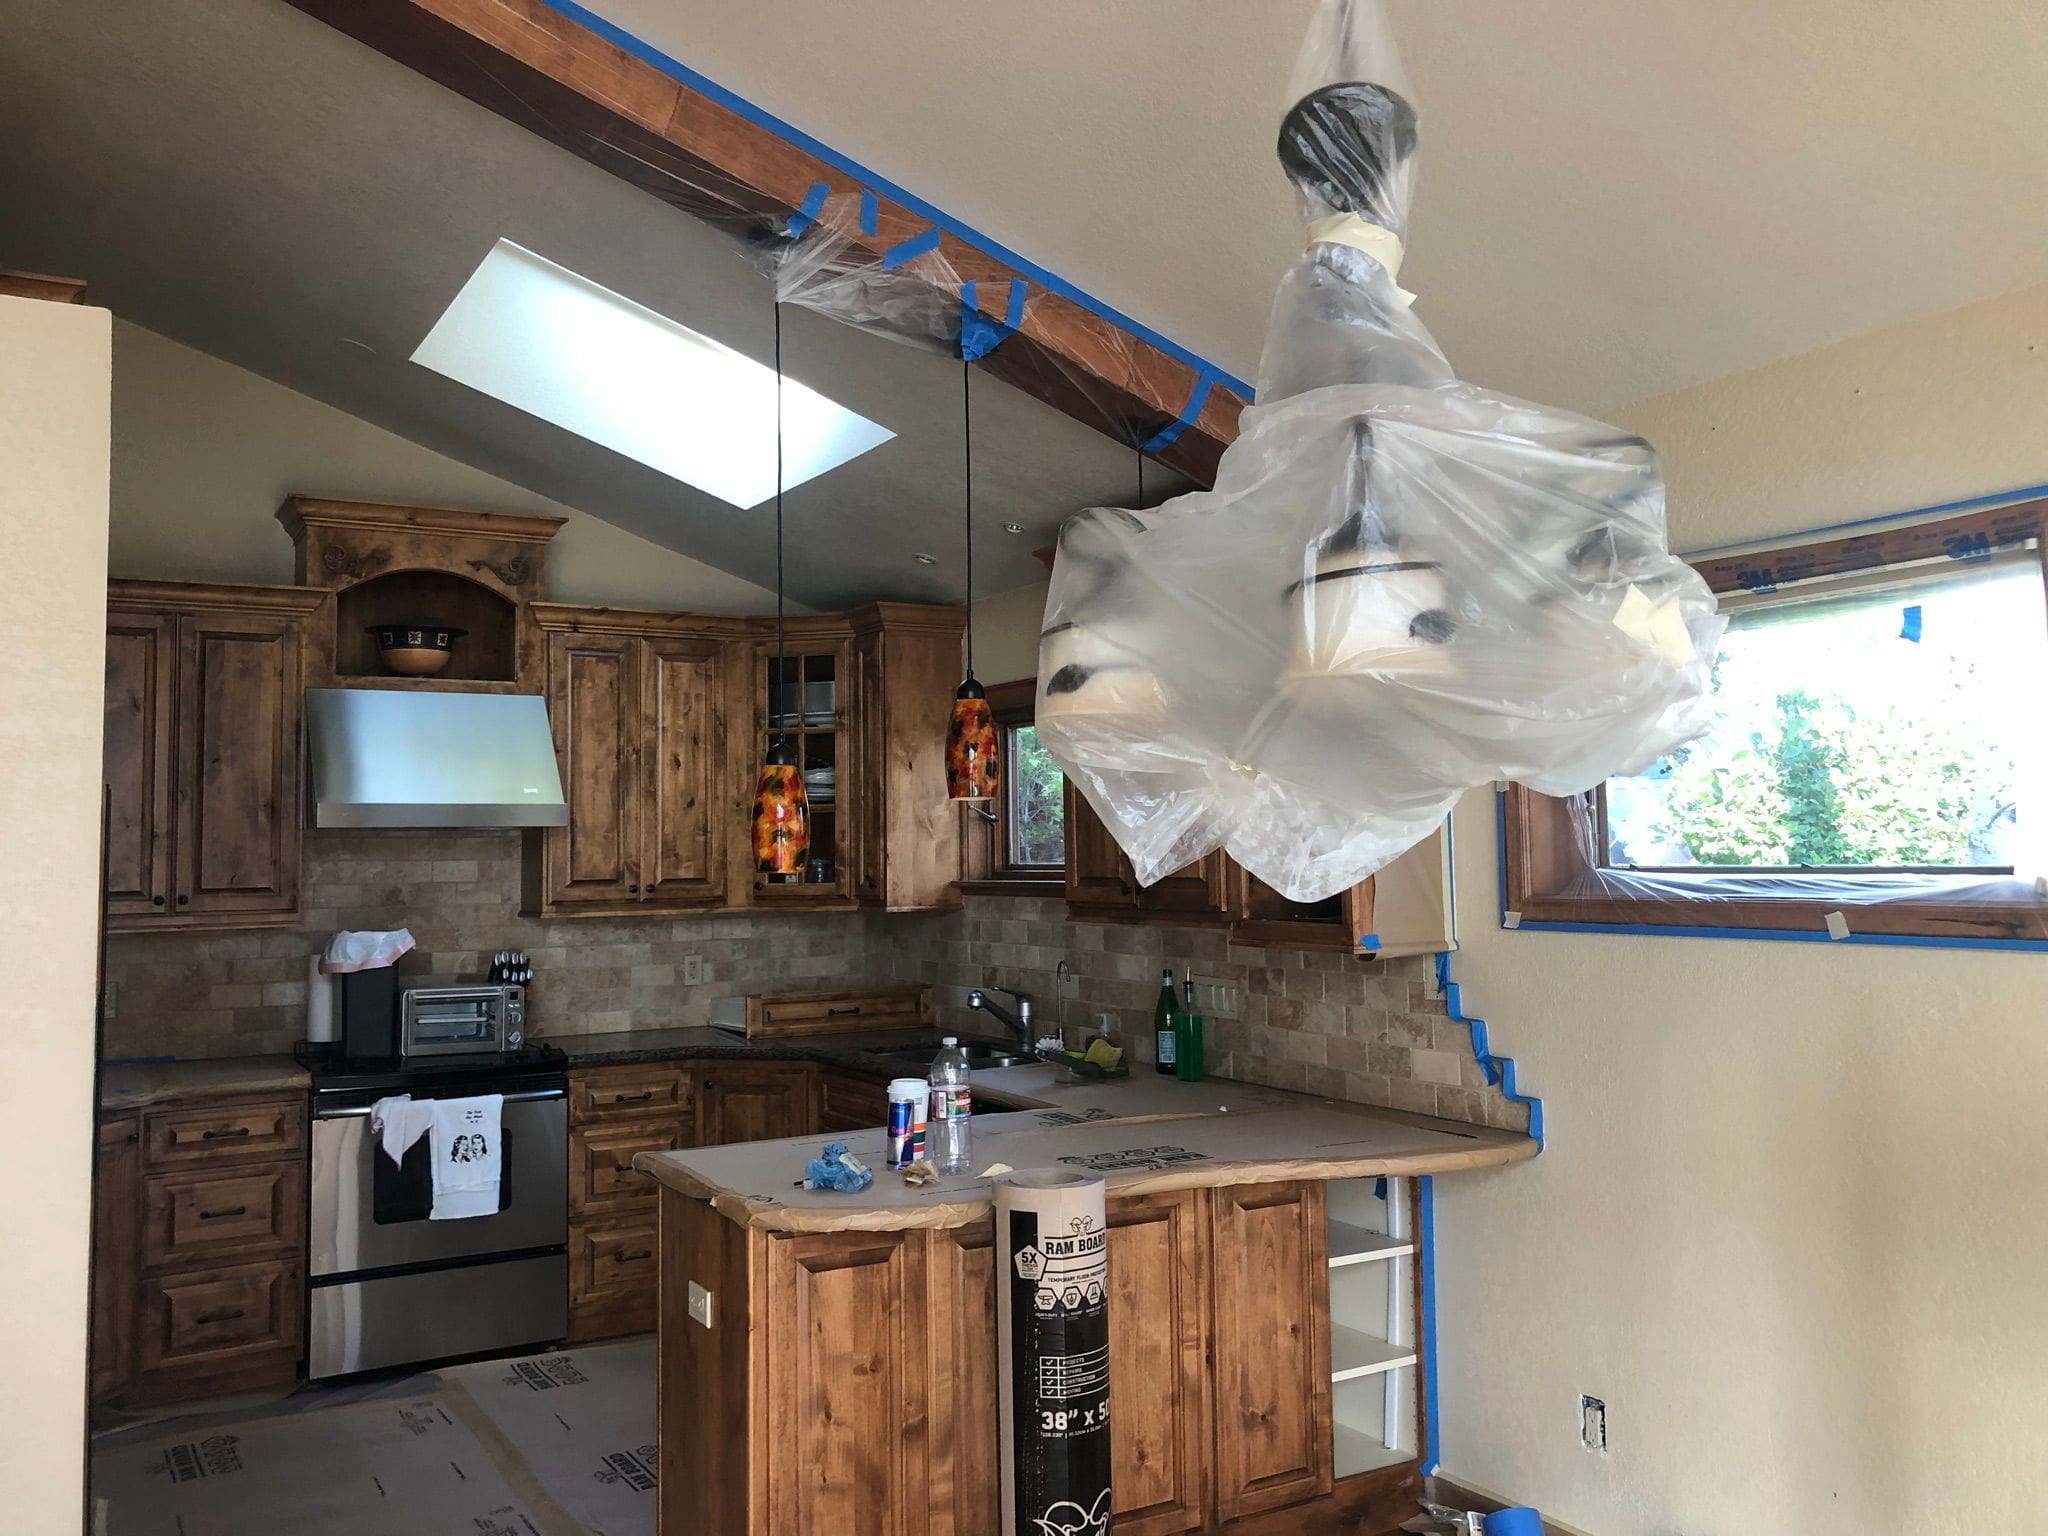 Kitchen & overhead light covered with plastic in anticipation of drywall remodel.